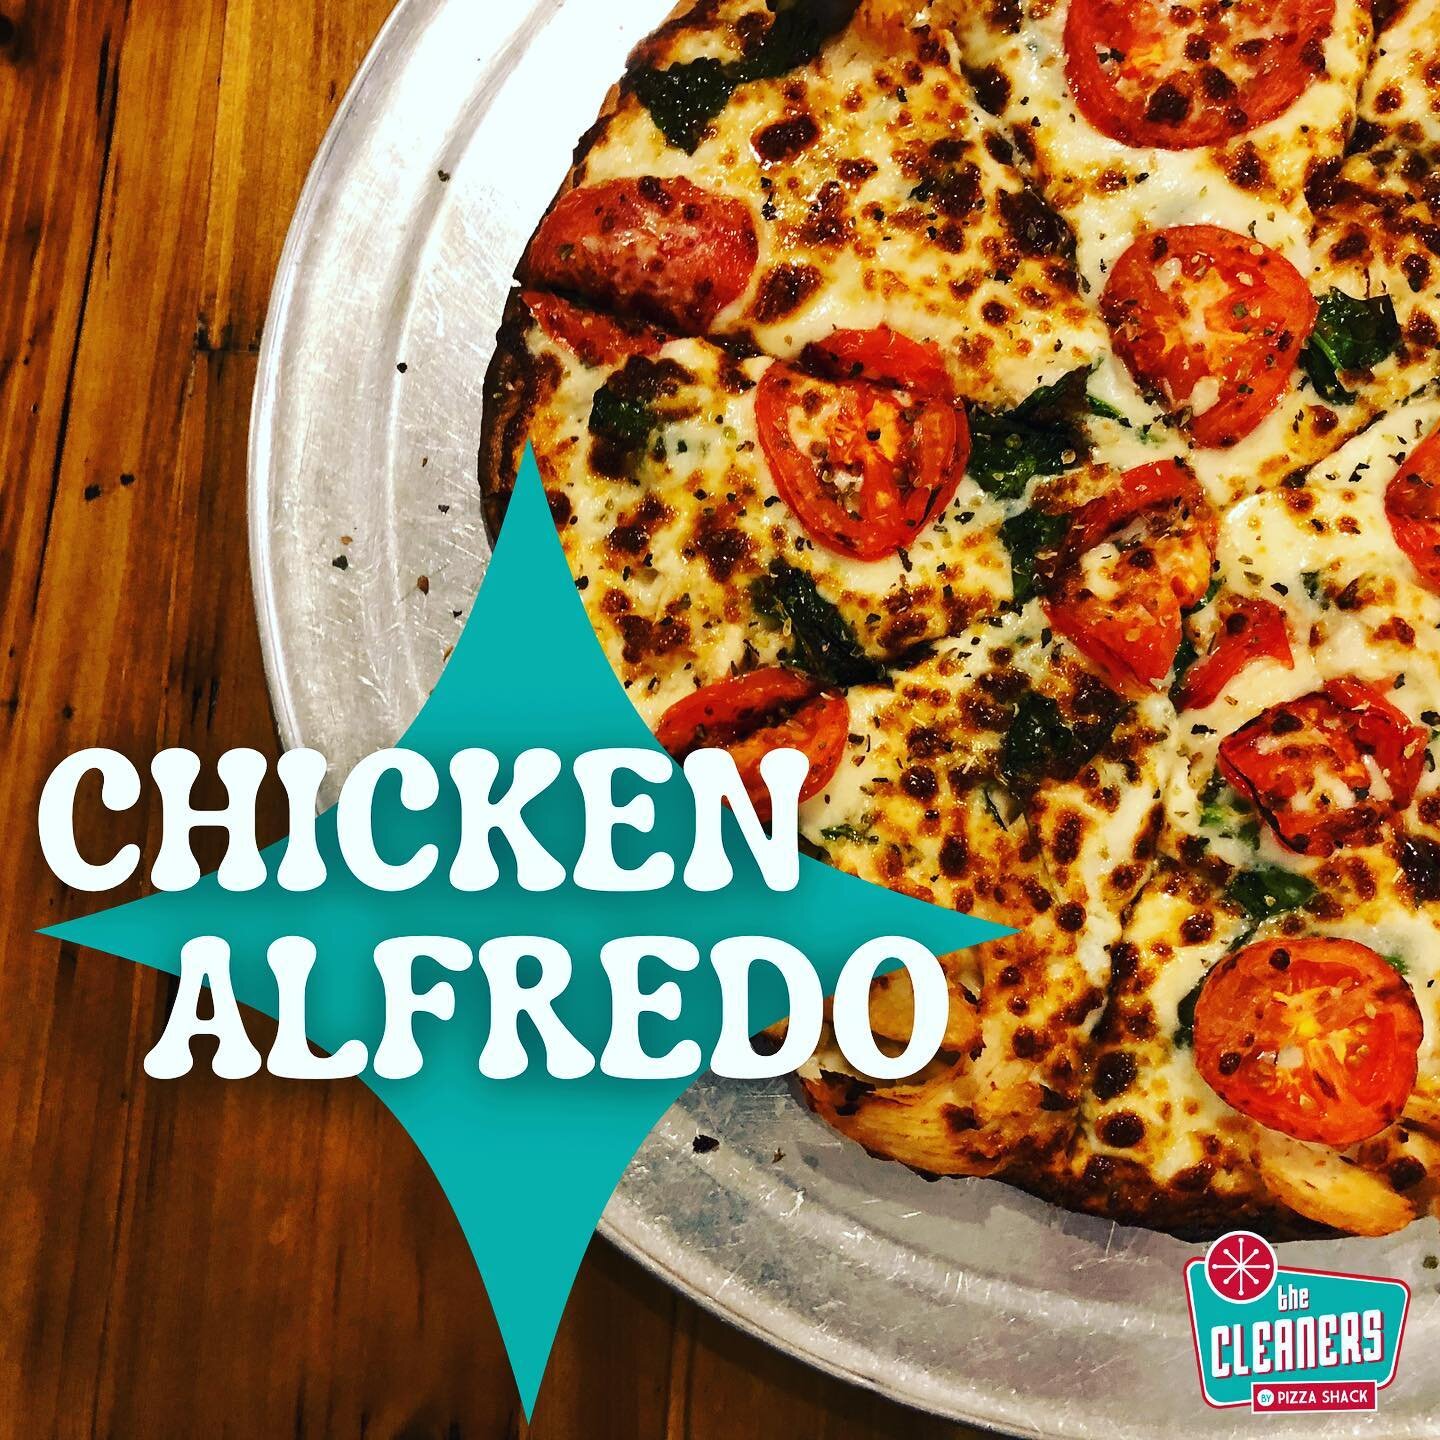 Some days call for pizza, don't they? Try our Chicken Alfredo Pizza today. 
A savory dish made with fresh pizza dough baked with our creamy alfredo sauce topped with mozzarella cheese, grilled chicken breast, Roma tomatoes, and spinach!

𝘗𝘭𝘦𝘢𝘴𝘦